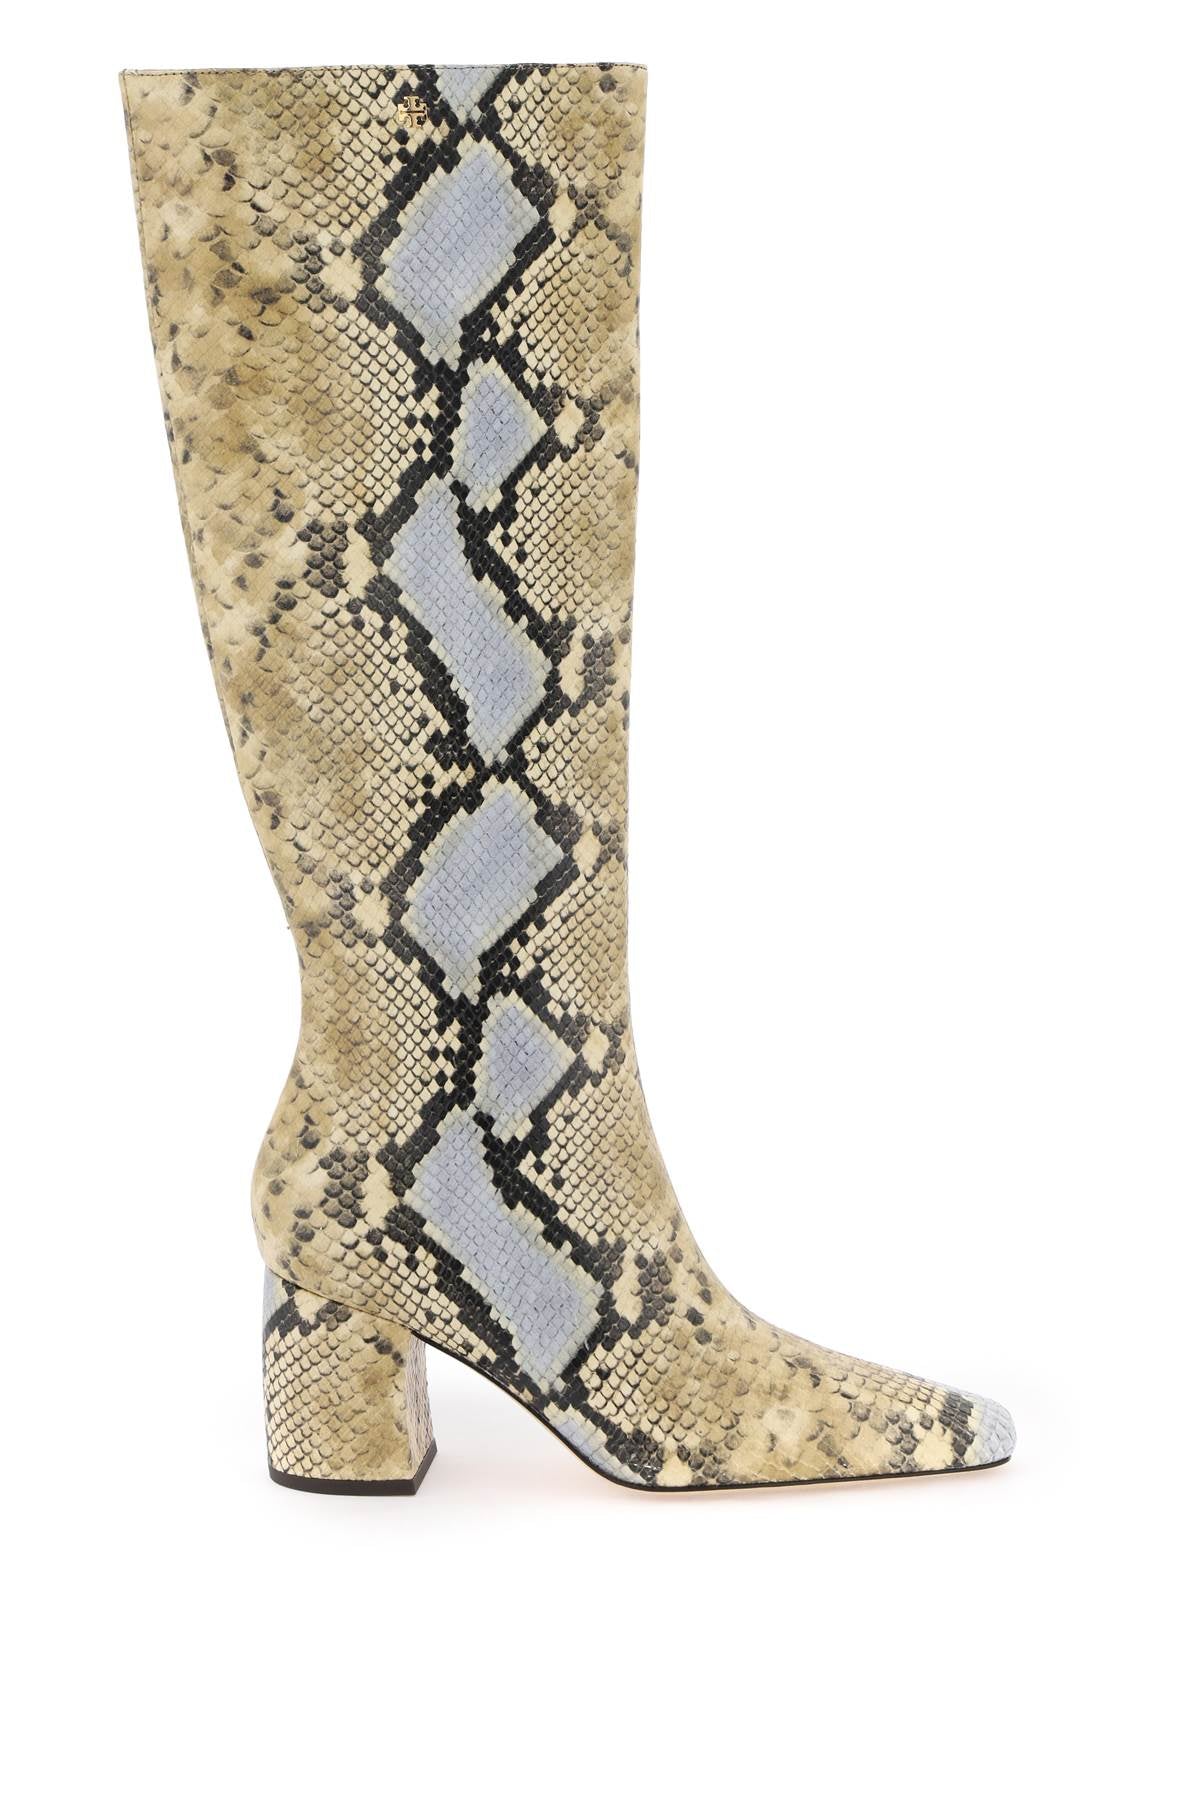 TORY BURCH Snake-Embossed Leather Banana Boots for Women - Beige